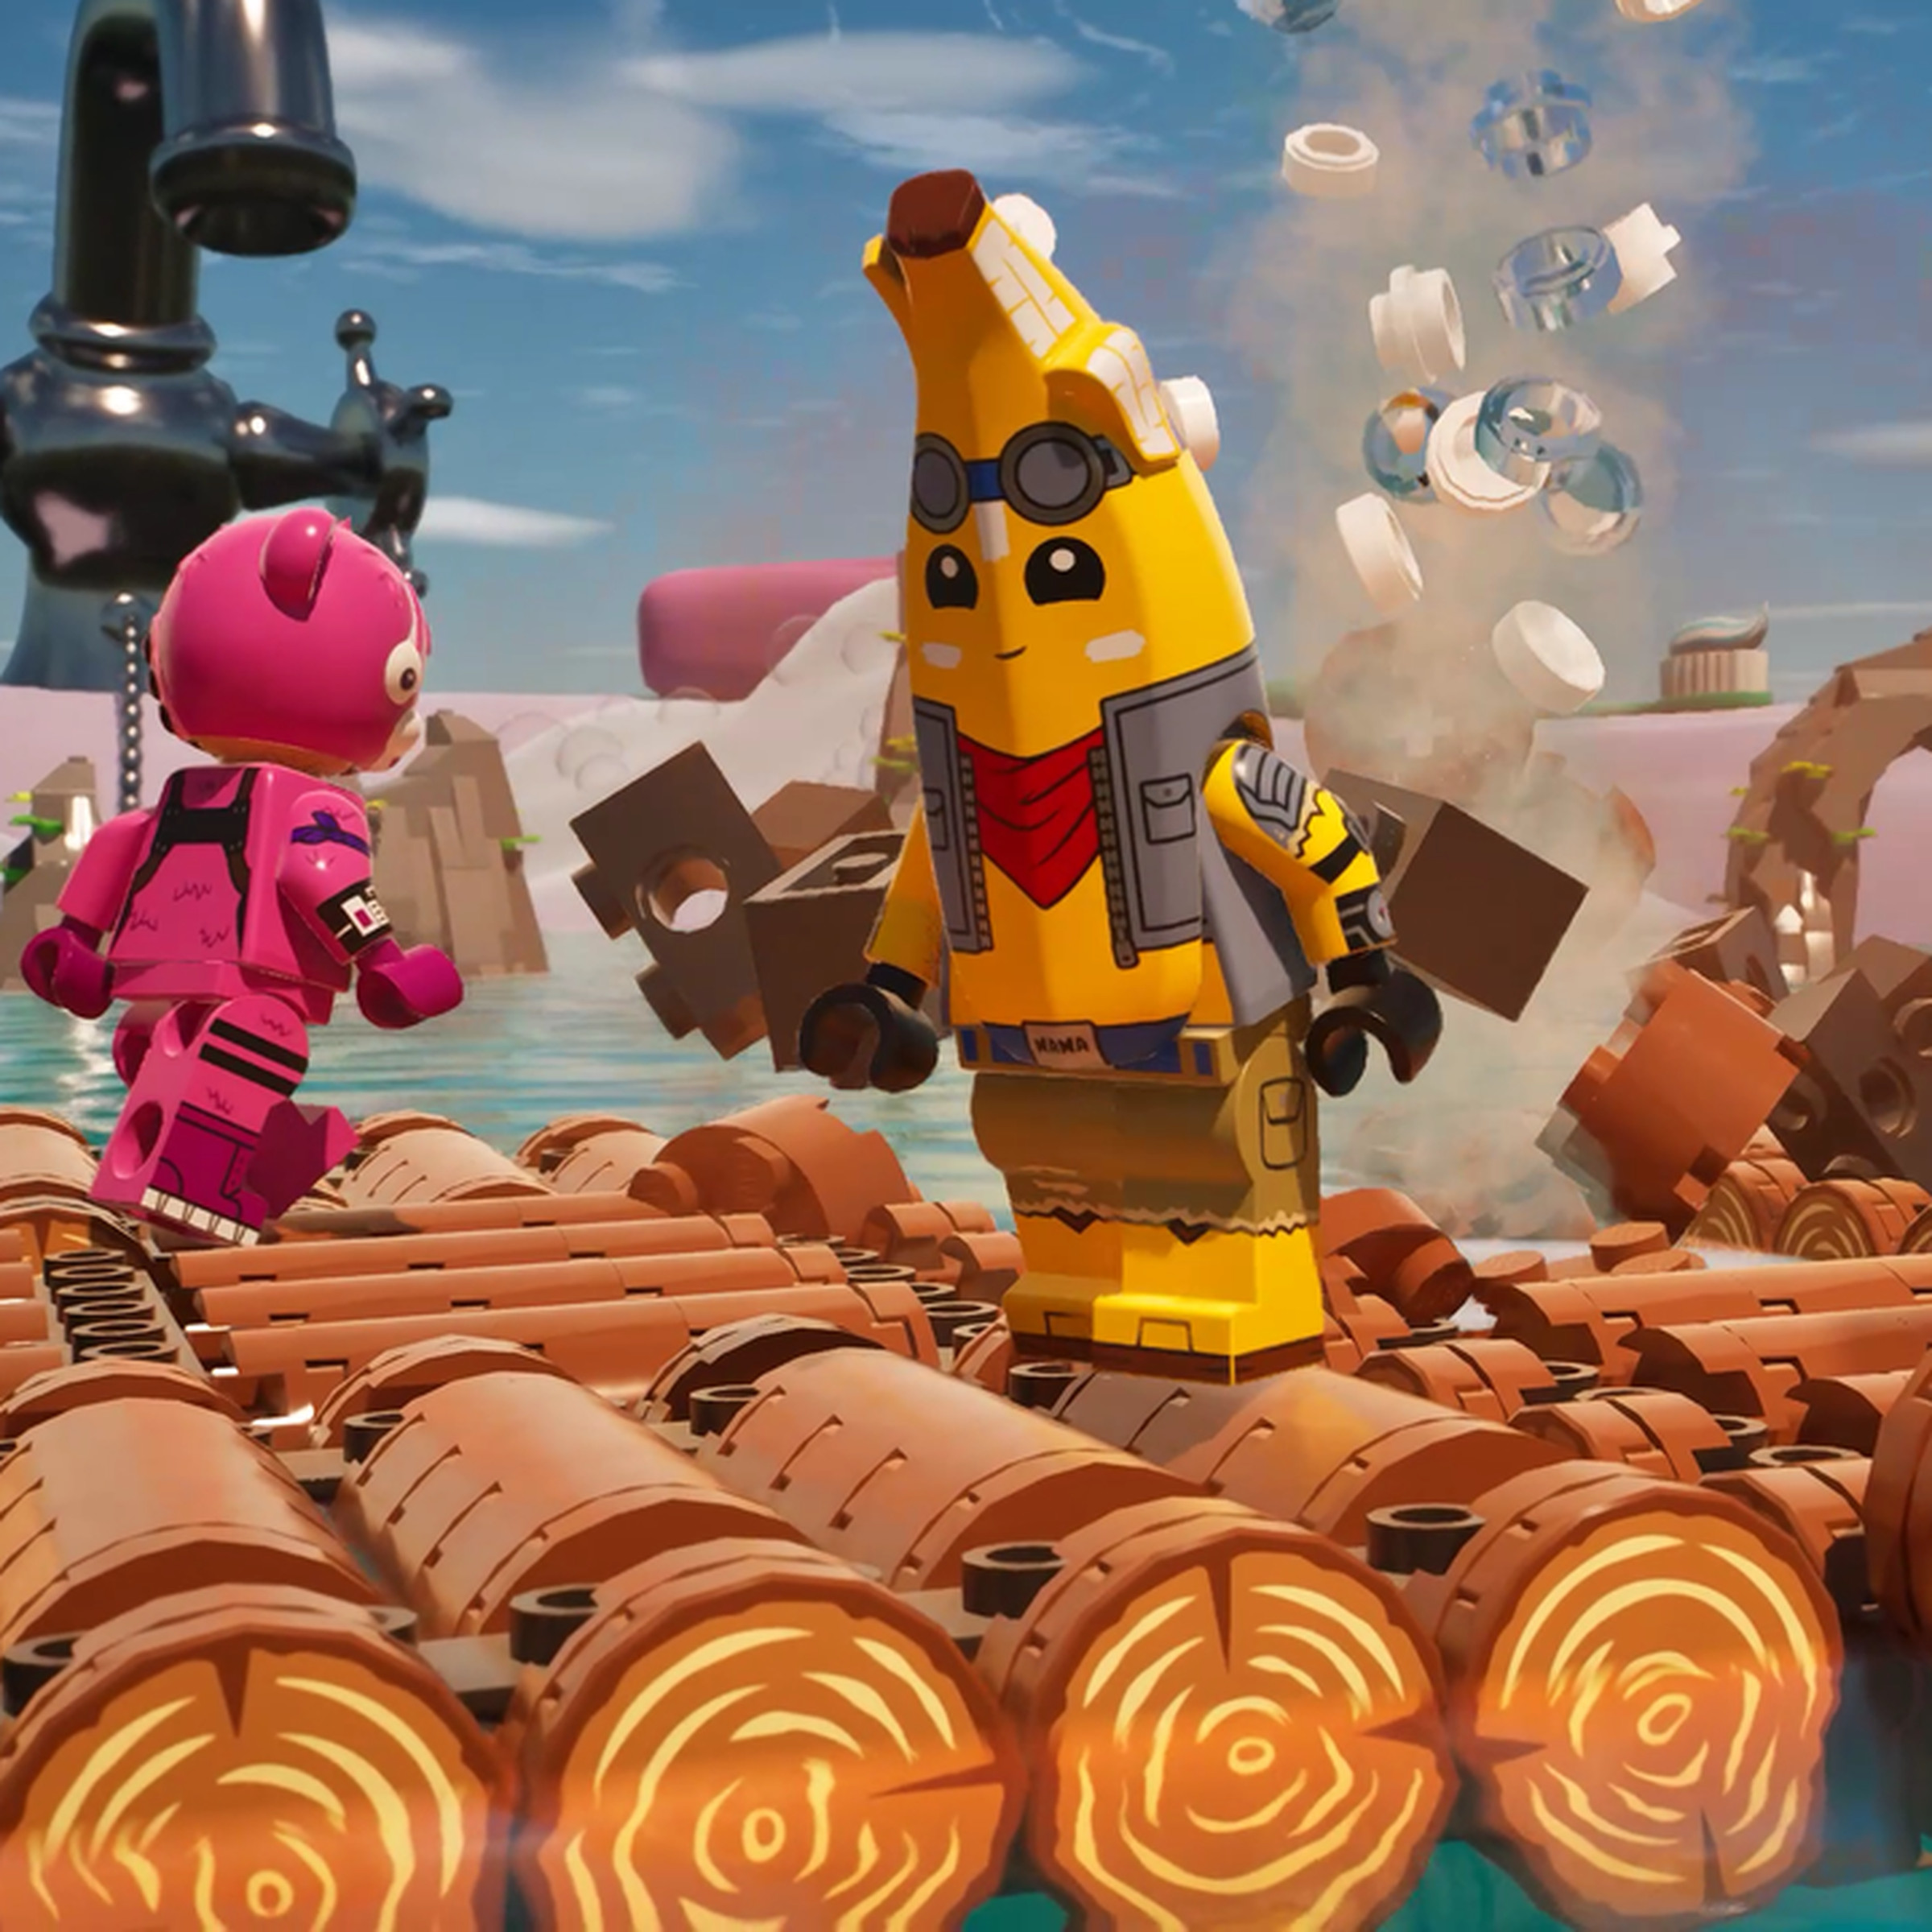 A screenshot from the Fortnite game Lego Raft Survival.